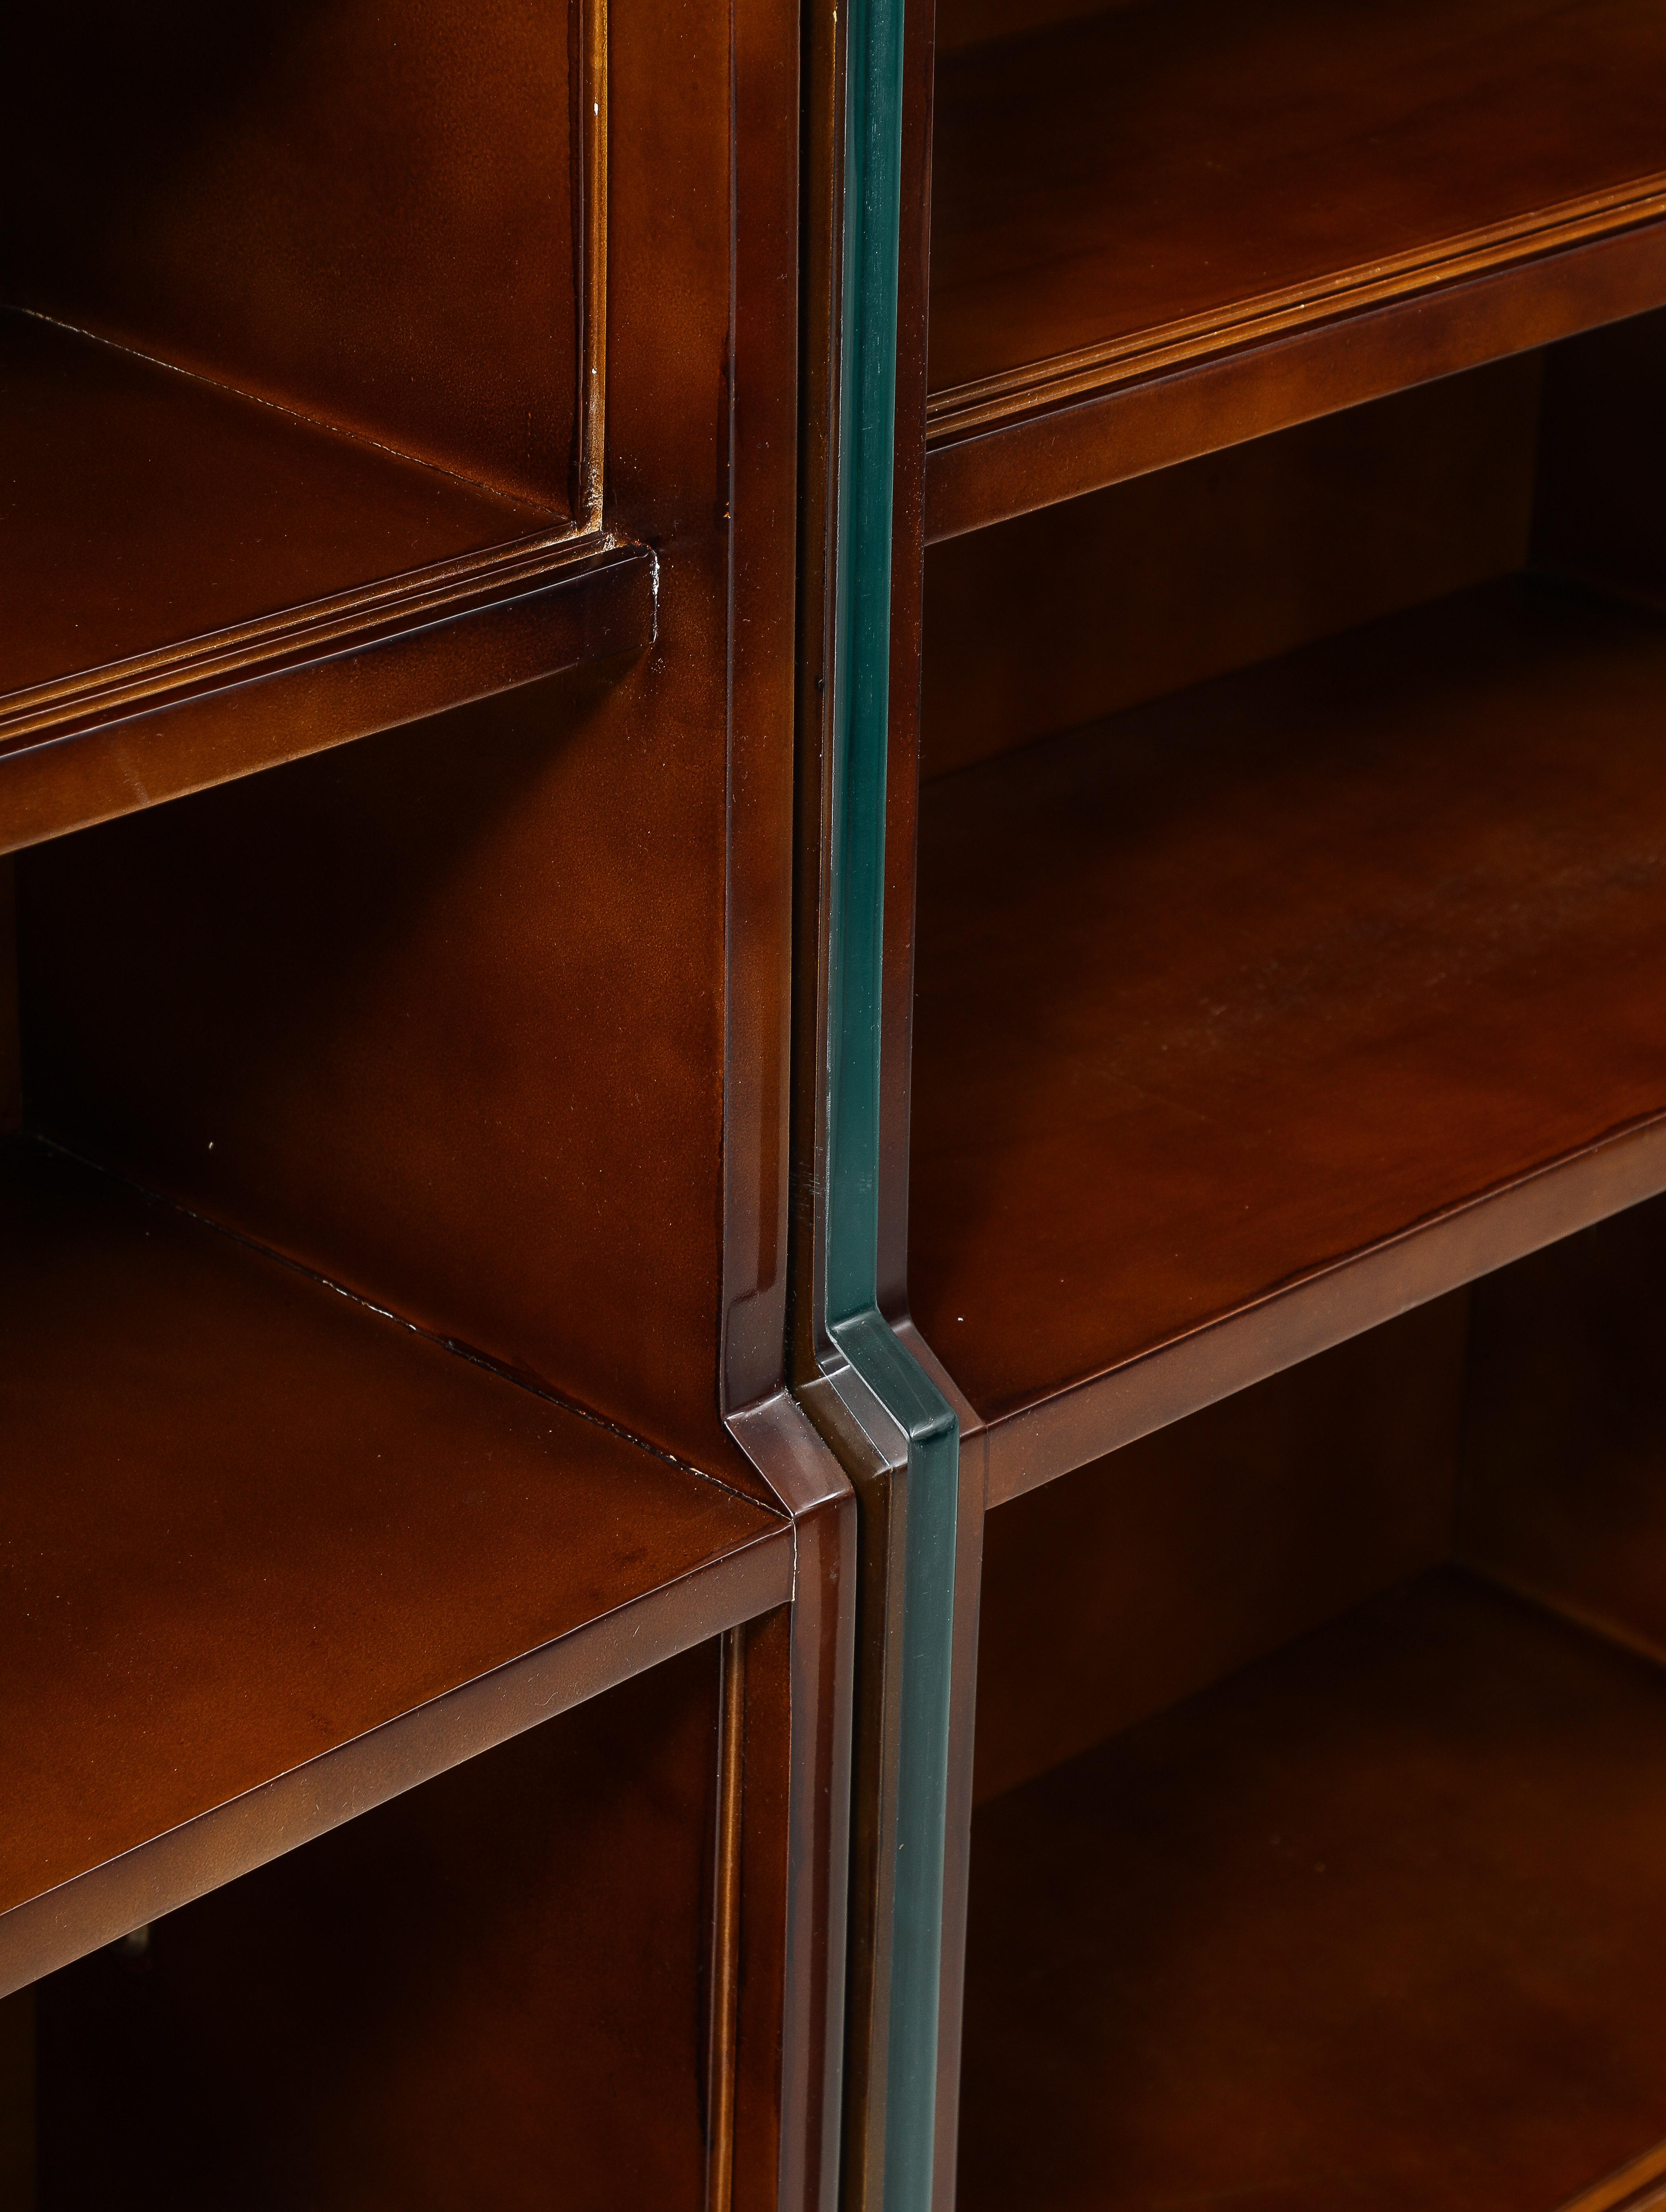 Bronze Raphael Raphel Bookcase in Lacquered Wood & Glass, France 1950's For Sale